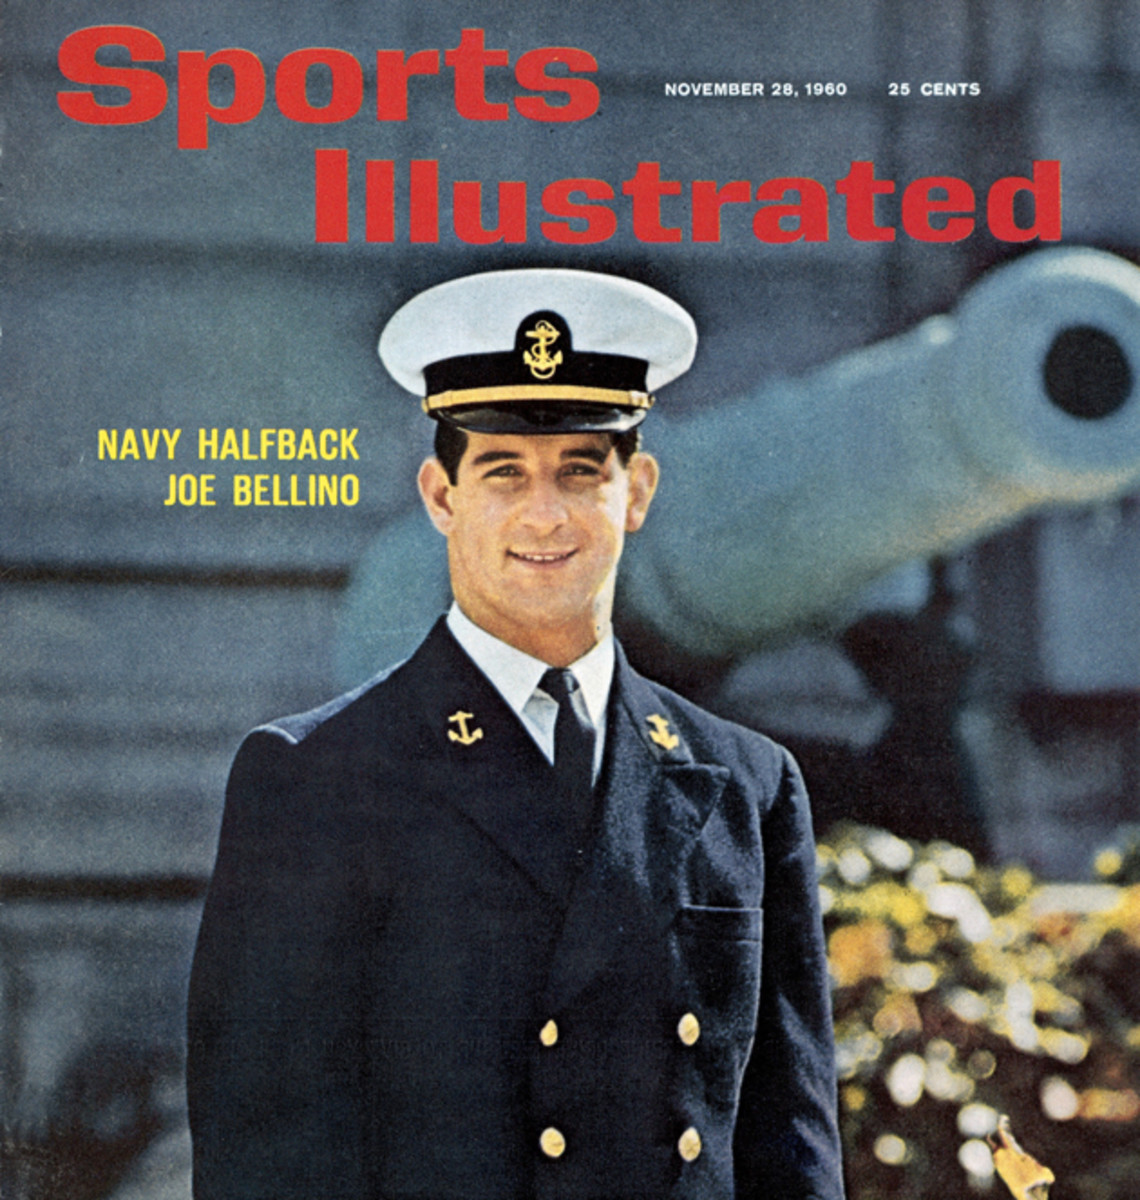 Navy's Joe Bellino on the Nov. 28, 1960 cover of Sports Illustrated.